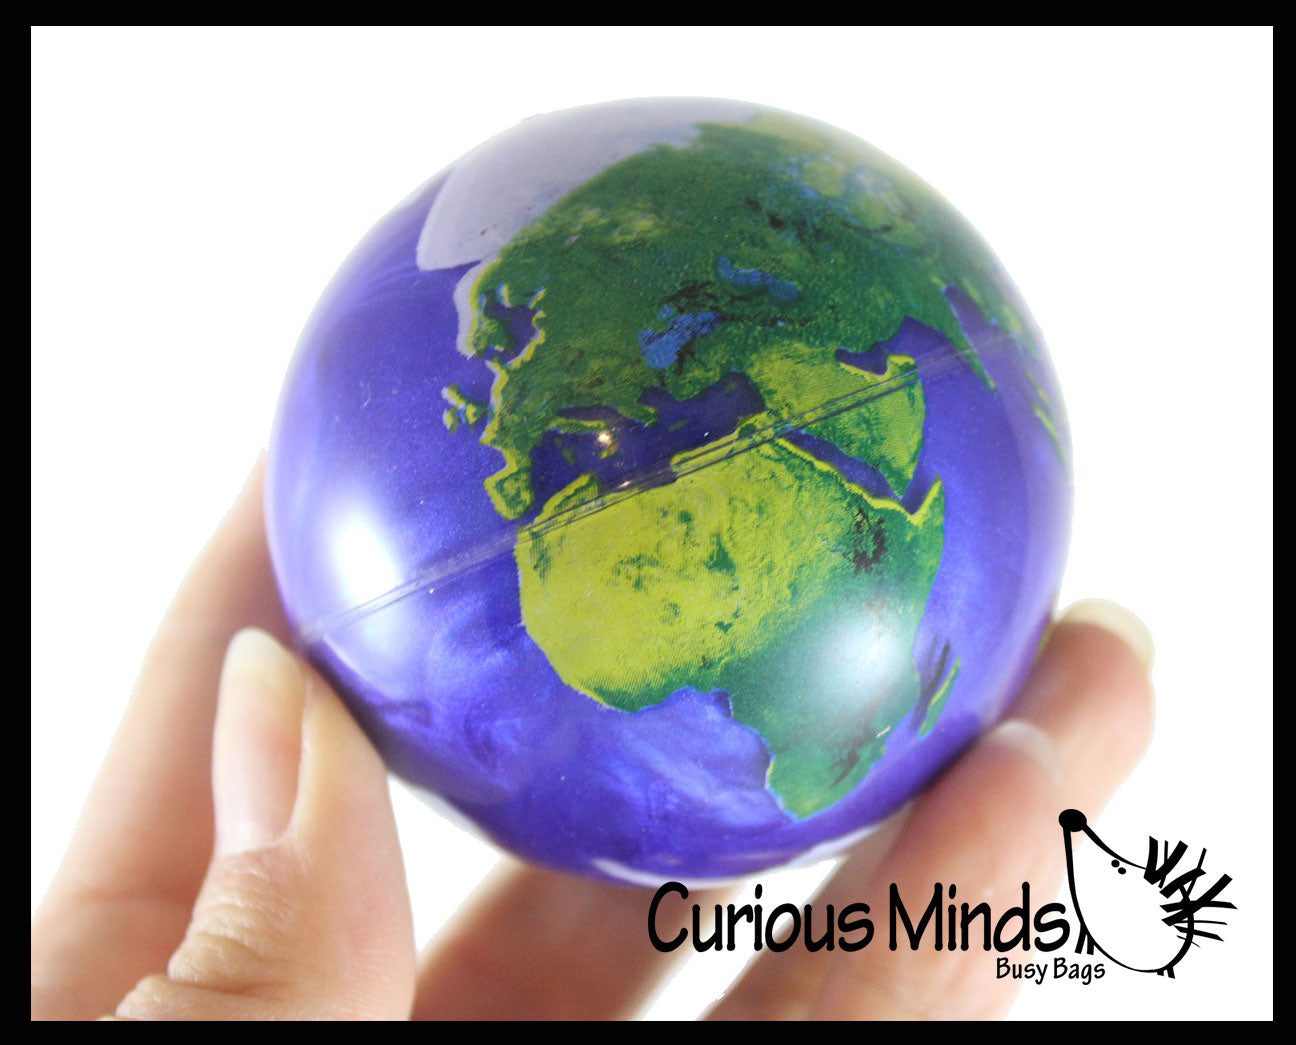 LAST CHANCE - LIMITED STOCK - Large Earth 2.5 Bouncy Ball - Swirling